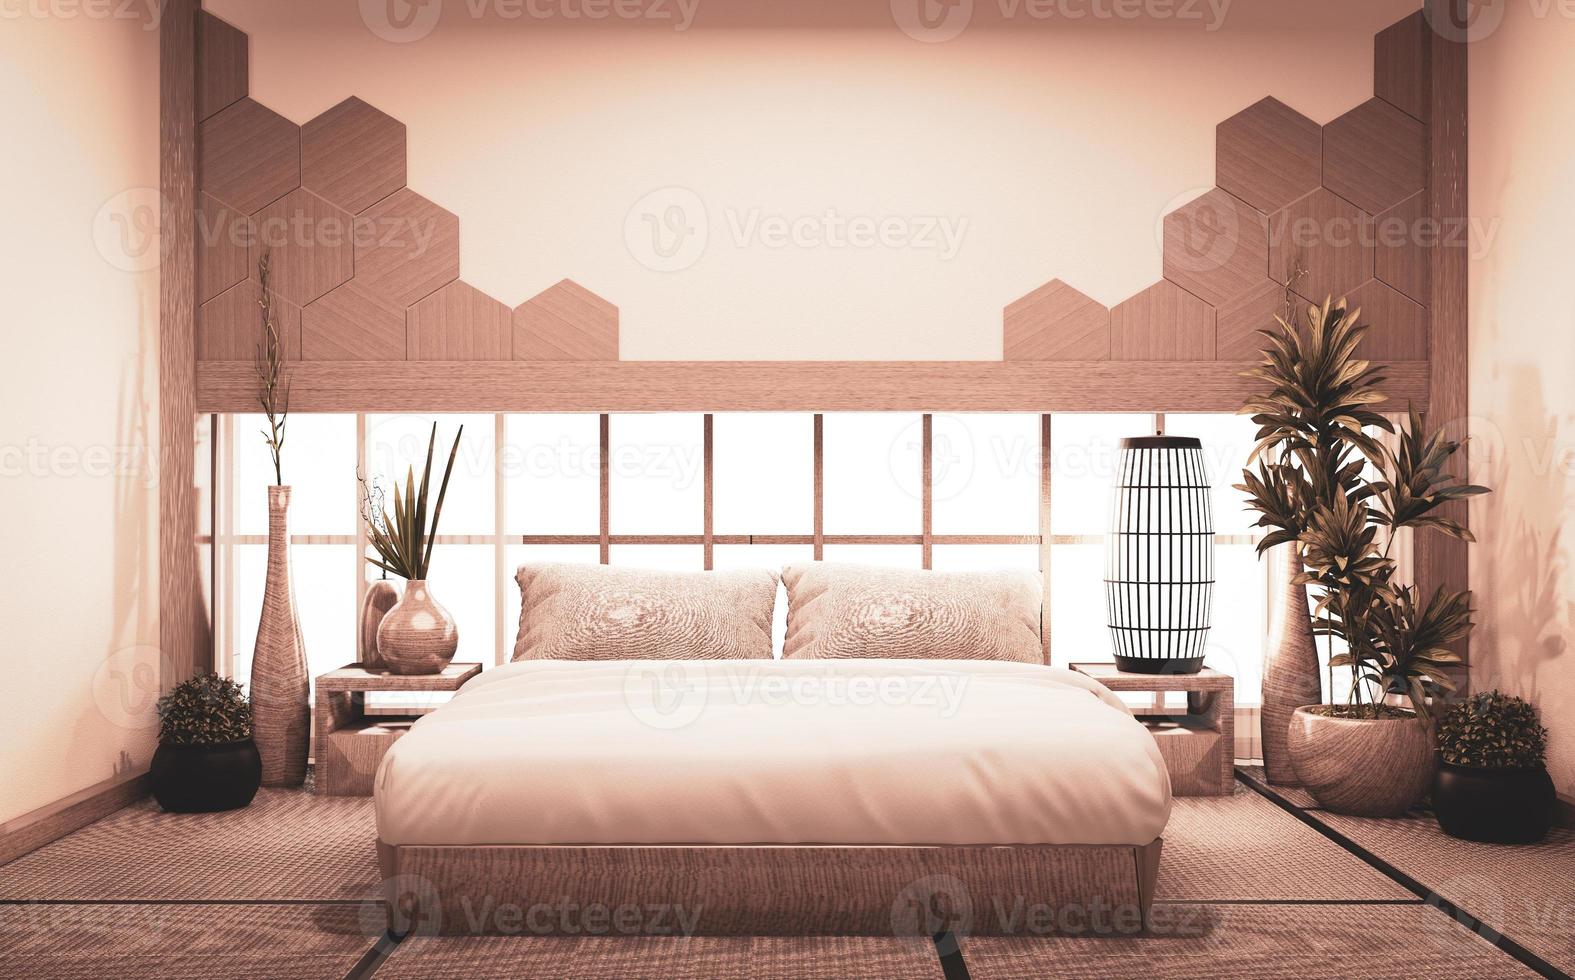 Bedroom japan style and wall design hexagon tiles wooden, wooden bed and decoration on tatami mat.3D rendering photo